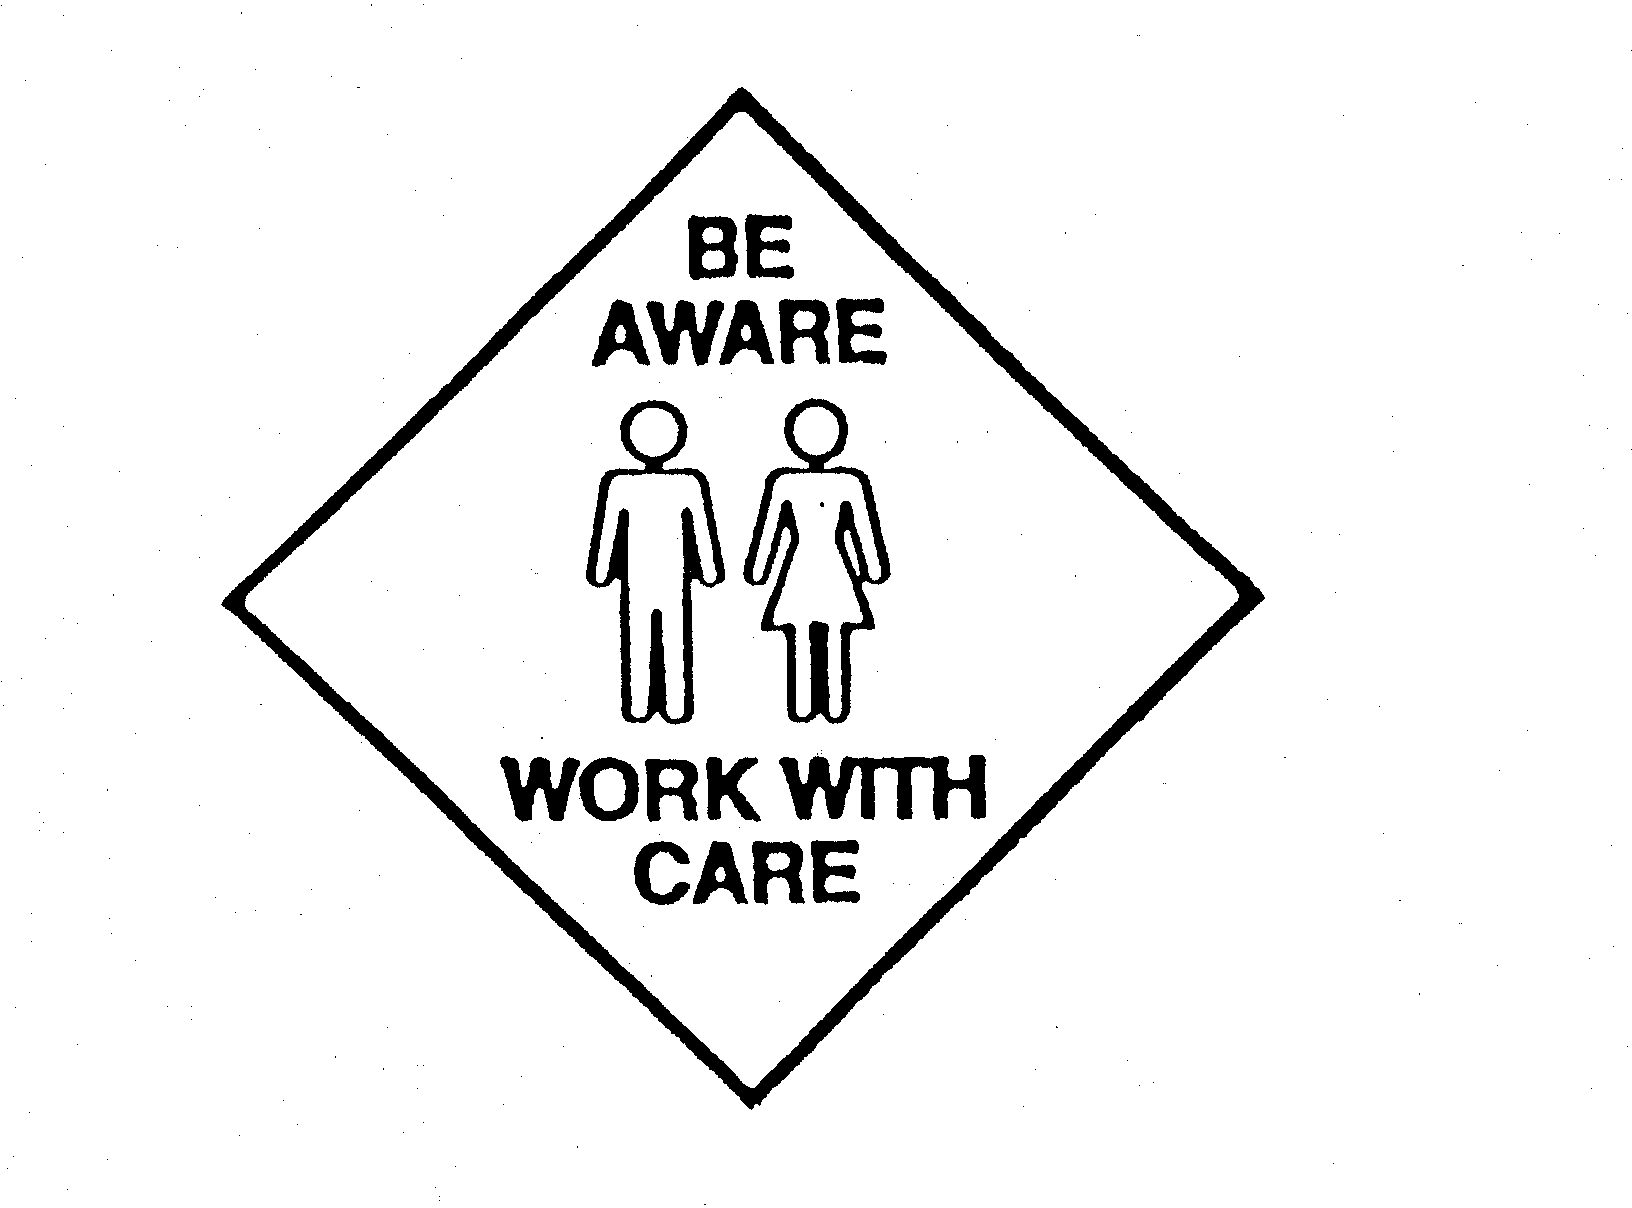  BE AWARE WORK WITH CARE